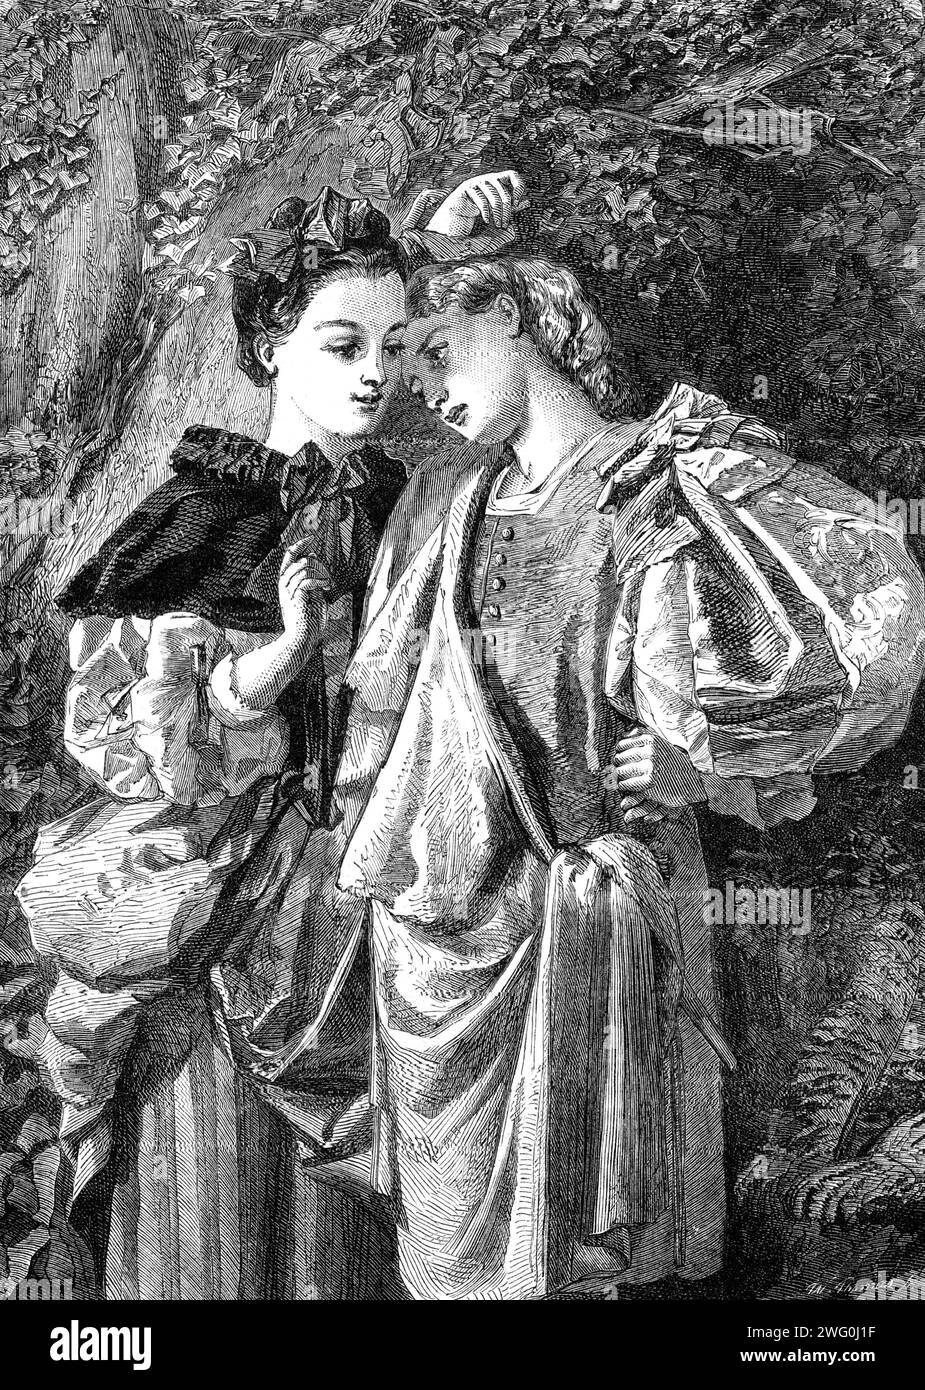 &quot;Rosalind and Celia&quot; (&quot;As You Like It&quot;, by Miss Edwards in the Exhibition of the Society of British Artists, 1862. Engraving of a painting '...by a lady previously unknown to fame...Poor Rosalind! So fair and feminine...she should never have assumed the male attire...she makes...a very a sorry page. Her sprightly, witty companion may well banter her upon her effeminacy...The pretty runaways should, at all events, change their costumes...We think that the almost querulous plaints of the tenderhearted lovelorn maiden, her yearning for some casual word of comfort from her kind Stock Photo